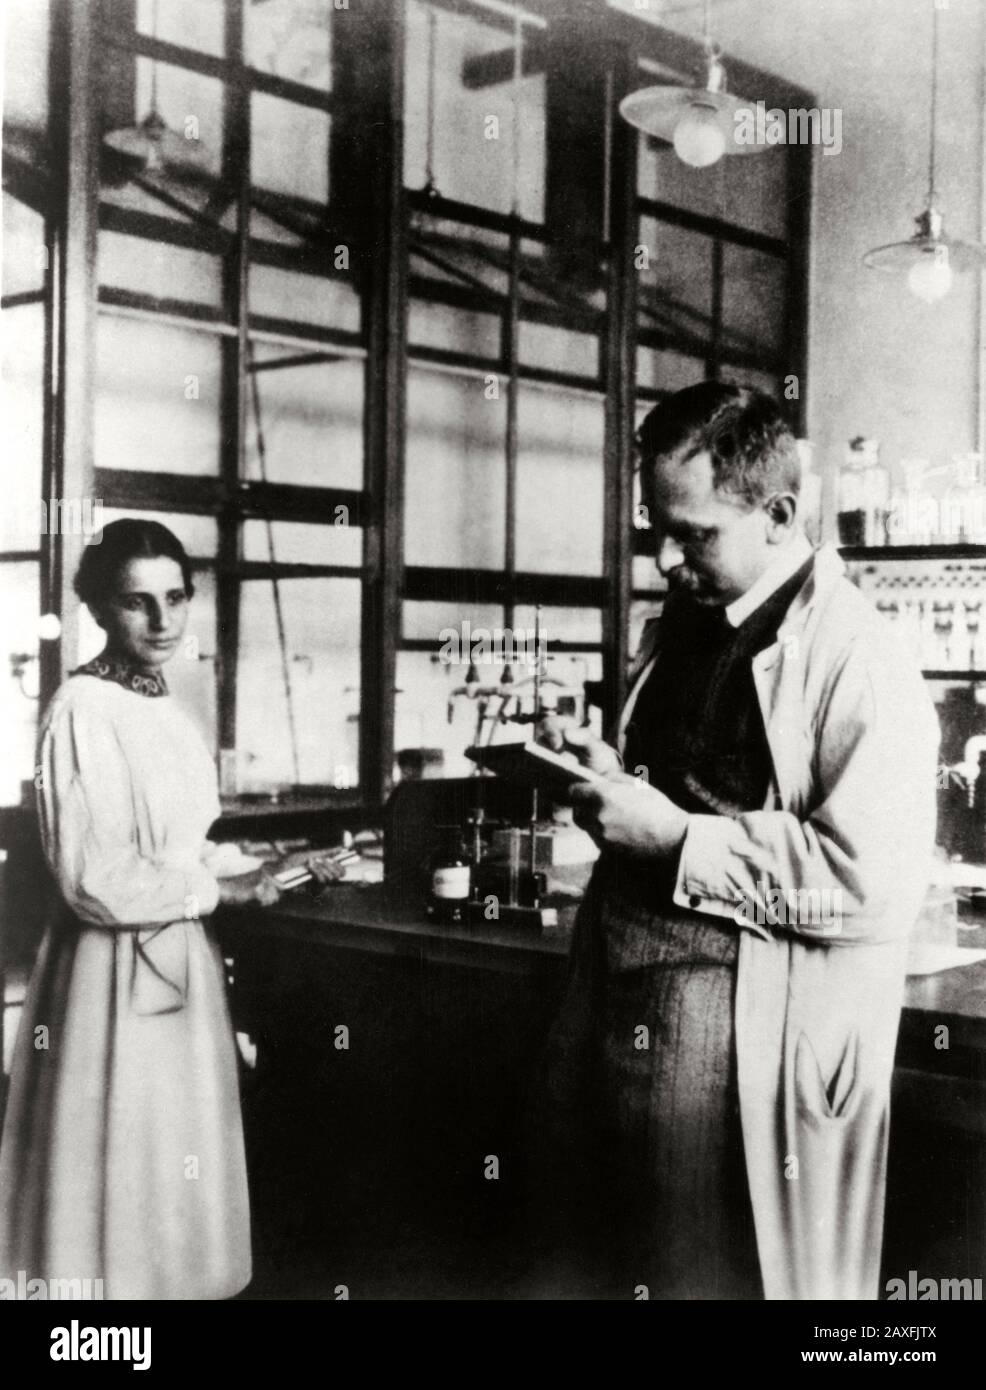 1913 , GERMANY :  The german  physicist Lise Meitner ( 1878 - 1968 ) and radiochemist Otto Hahn ( 1879 - 1968 ) in their German laboratory . Although her work was ignored by the Nobel Committee when  they awarded the prize to Hahn in 1944, Meitner received many recognitions of her importance to twentieth-century physics, including being the first woman to receive the prestigious Enrico Fermi Award . - FISICO - FISICA - ATOMO - ATOMICO - RADIOTTIVITA' - SCIENZIATO - SCIENZA - PHYSICS - ATOM - ATOMIC - RADIOACTIVITY - SCIENCE - SCIENTIST- HISTORY -  foto storiche - foto storica  - scienziato - s Stock Photo